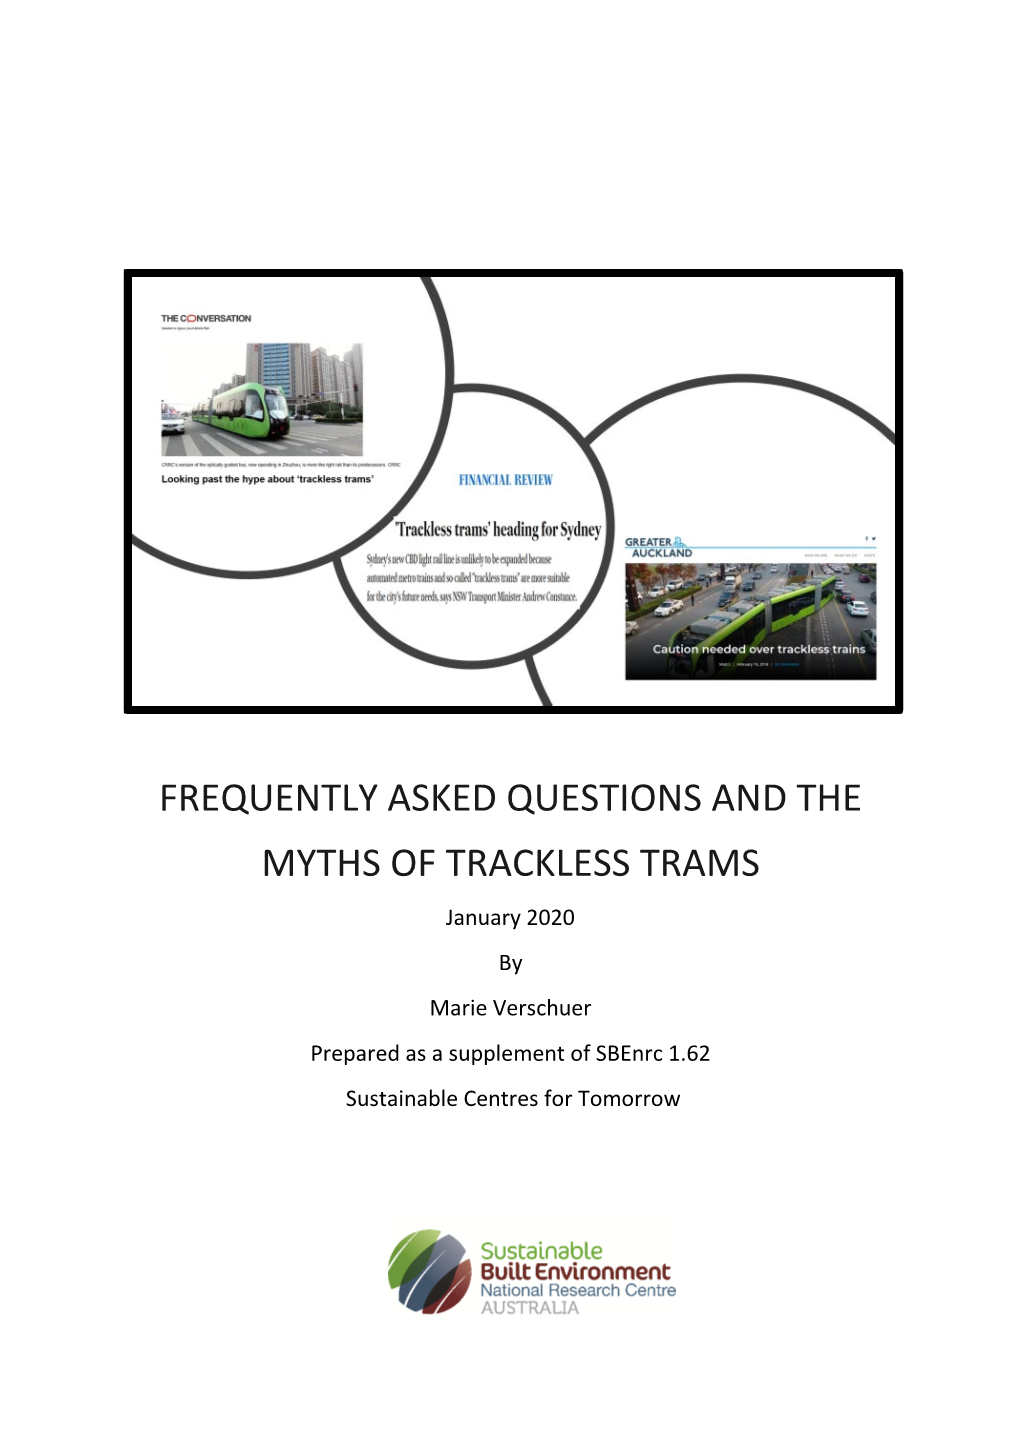 FREQUENTLY ASKED QUESTIONS and the MYTHS of TRACKLESS TRAMS January 2020 by Marie Verschuer Prepared As a Supplement of Sbenrc 1.62 Sustainable Centres for Tomorrow